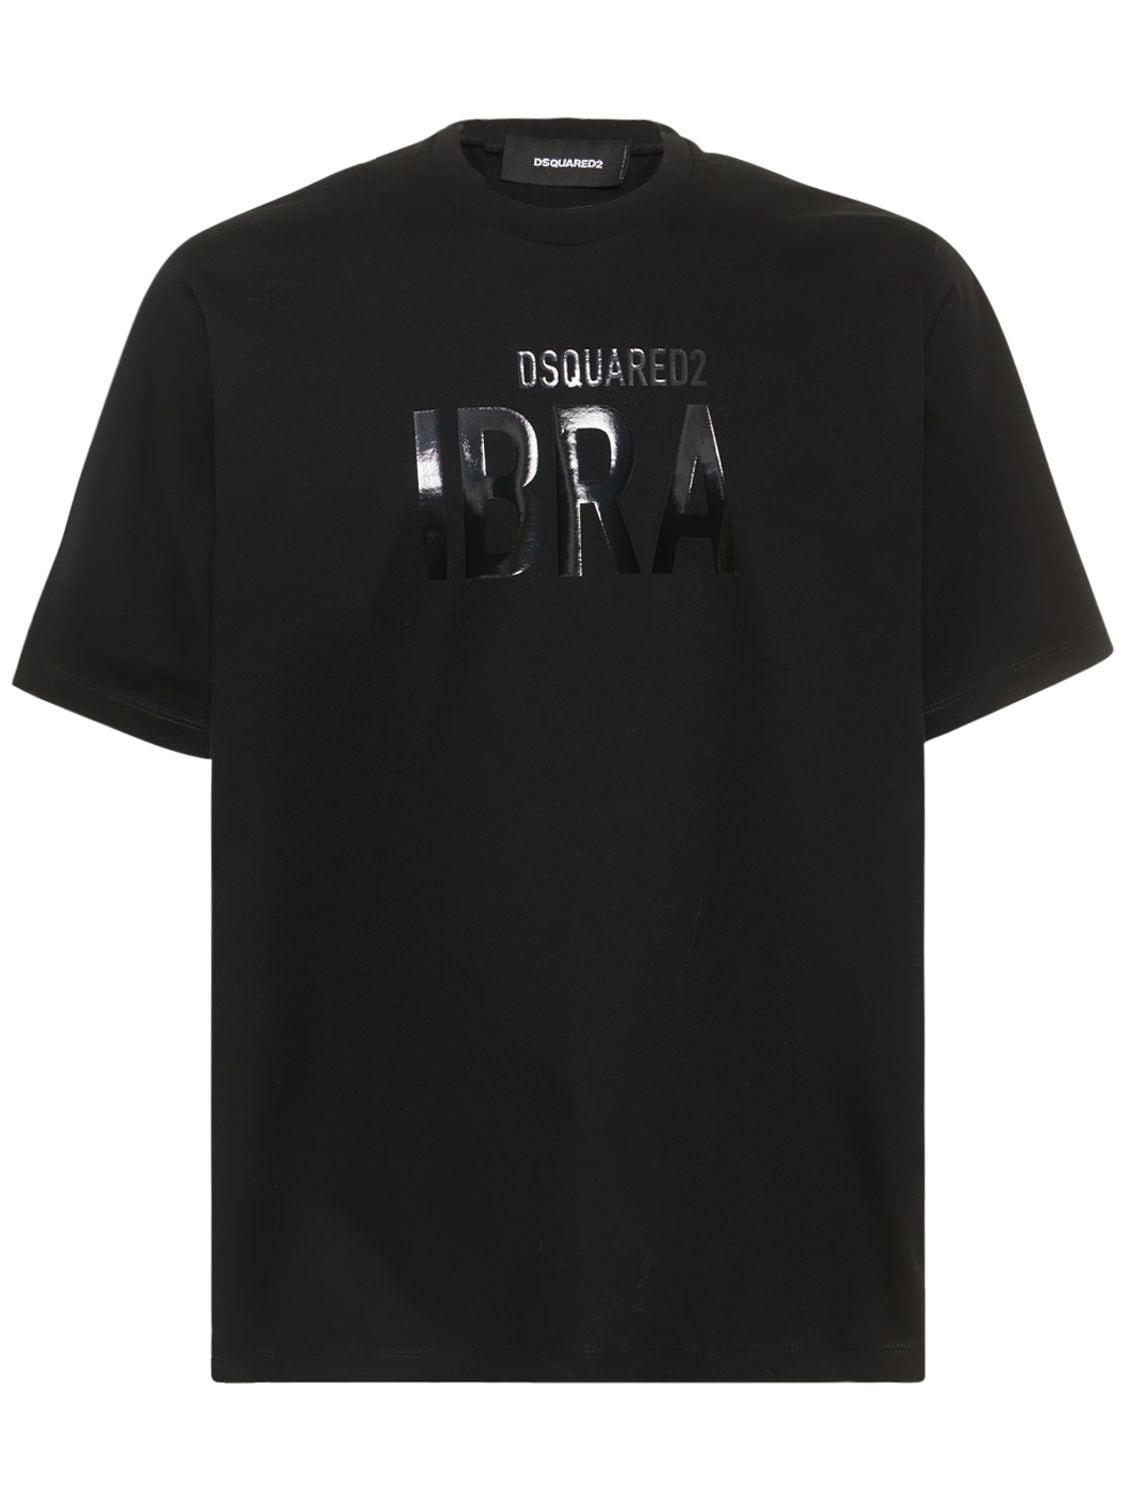 DSQUARED2 Ibra Over Cotton Jersey T-shirt